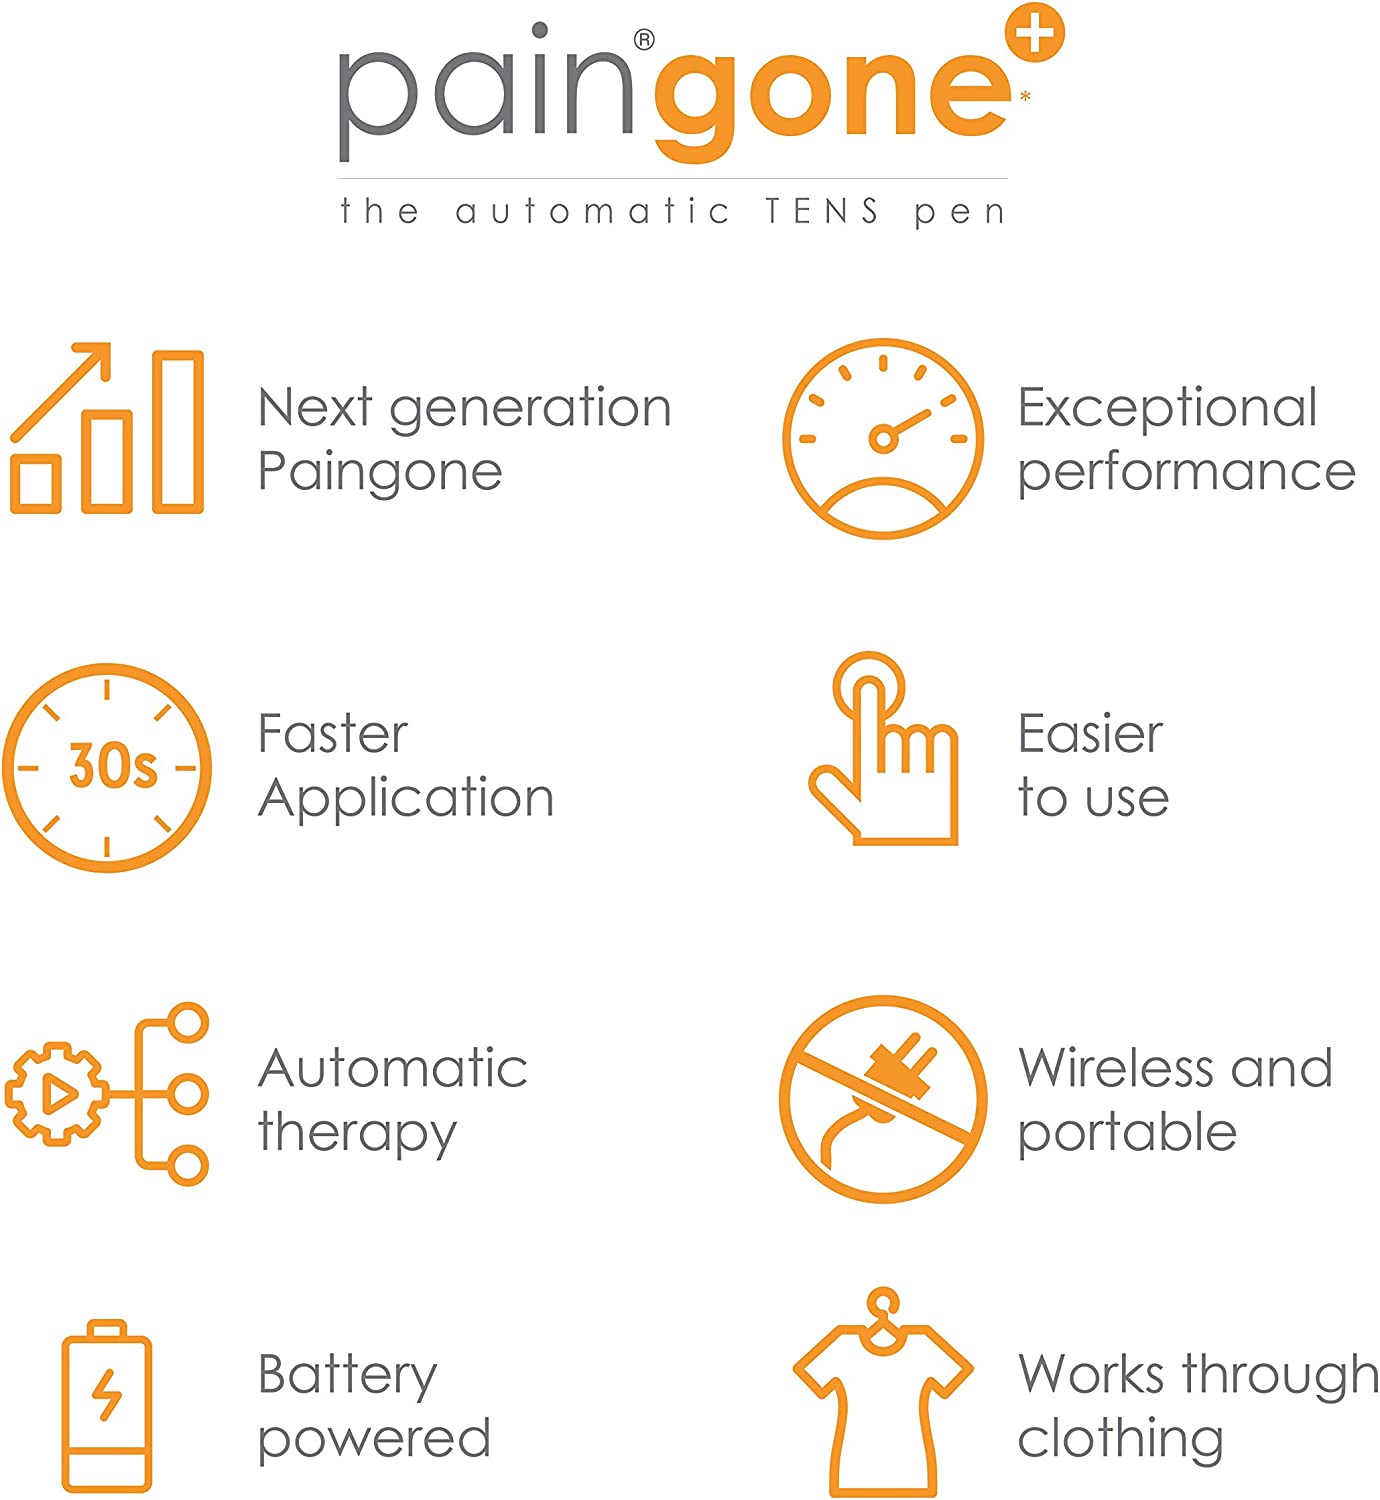 Paingone Plus Review 2023  Pros & Cons, Feature, Benefits, 50% Offer Price  